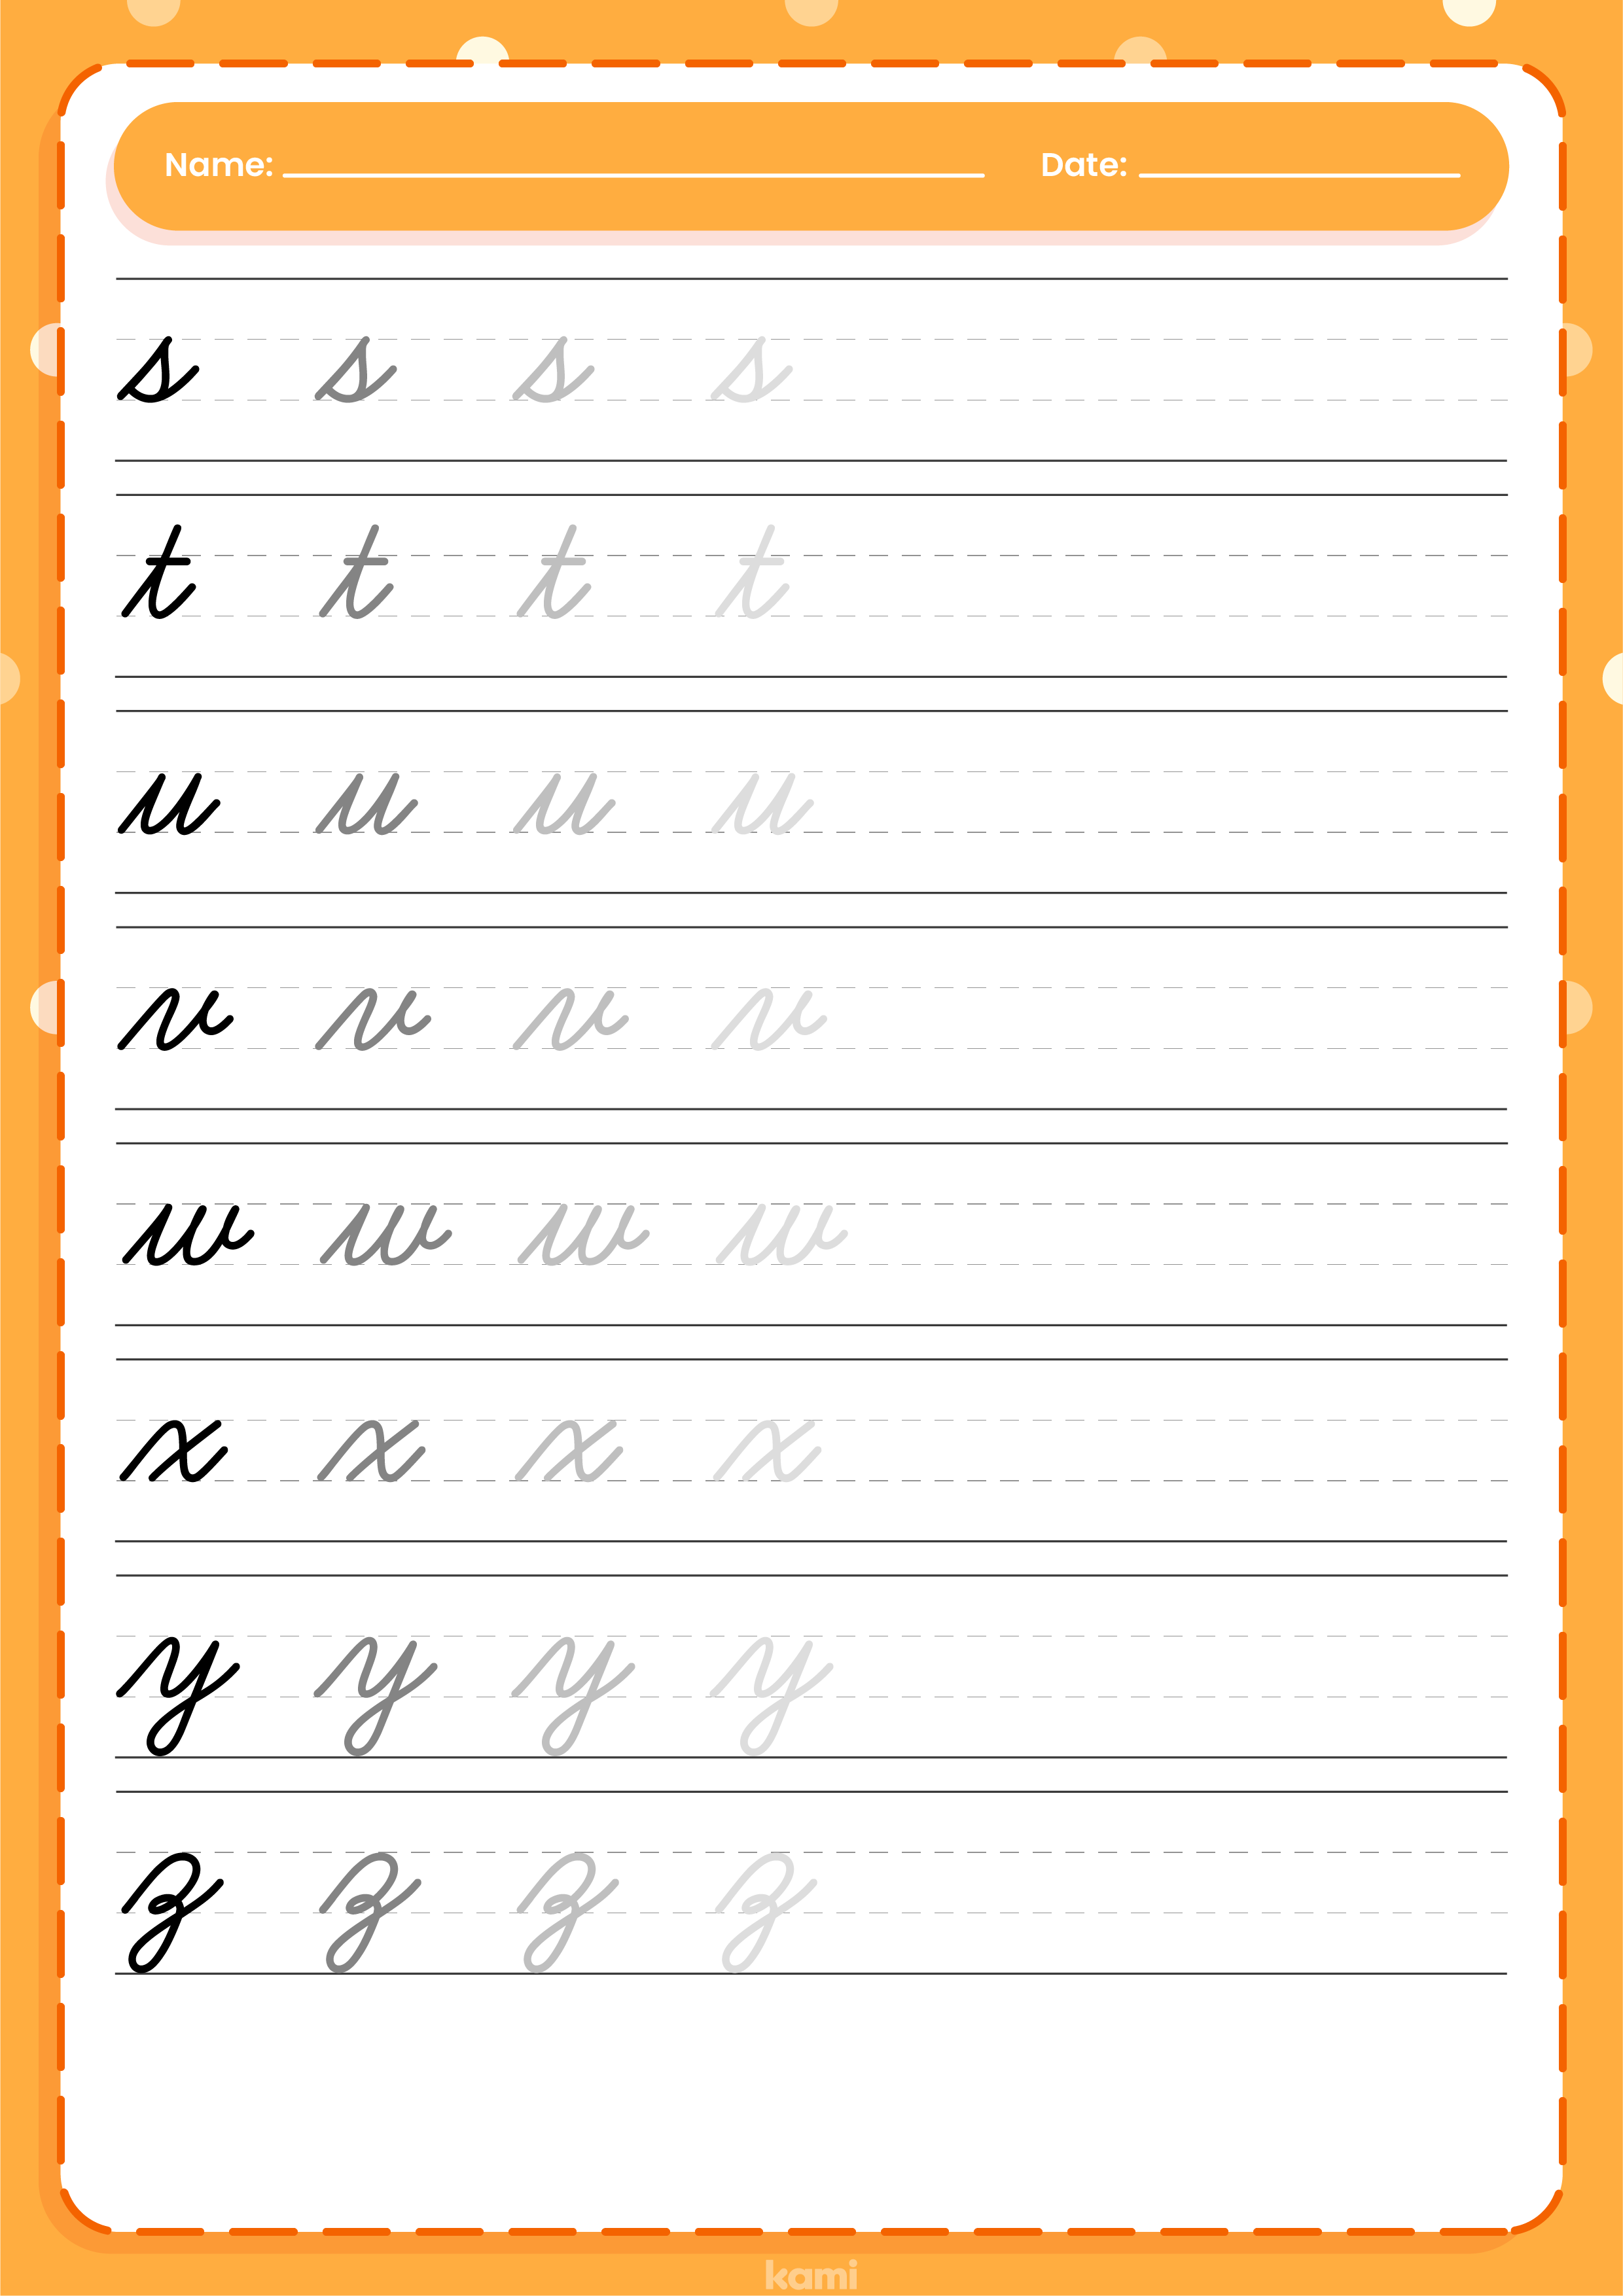 A cursive handwriting worksheet for younger learners with a lowercase exercise.